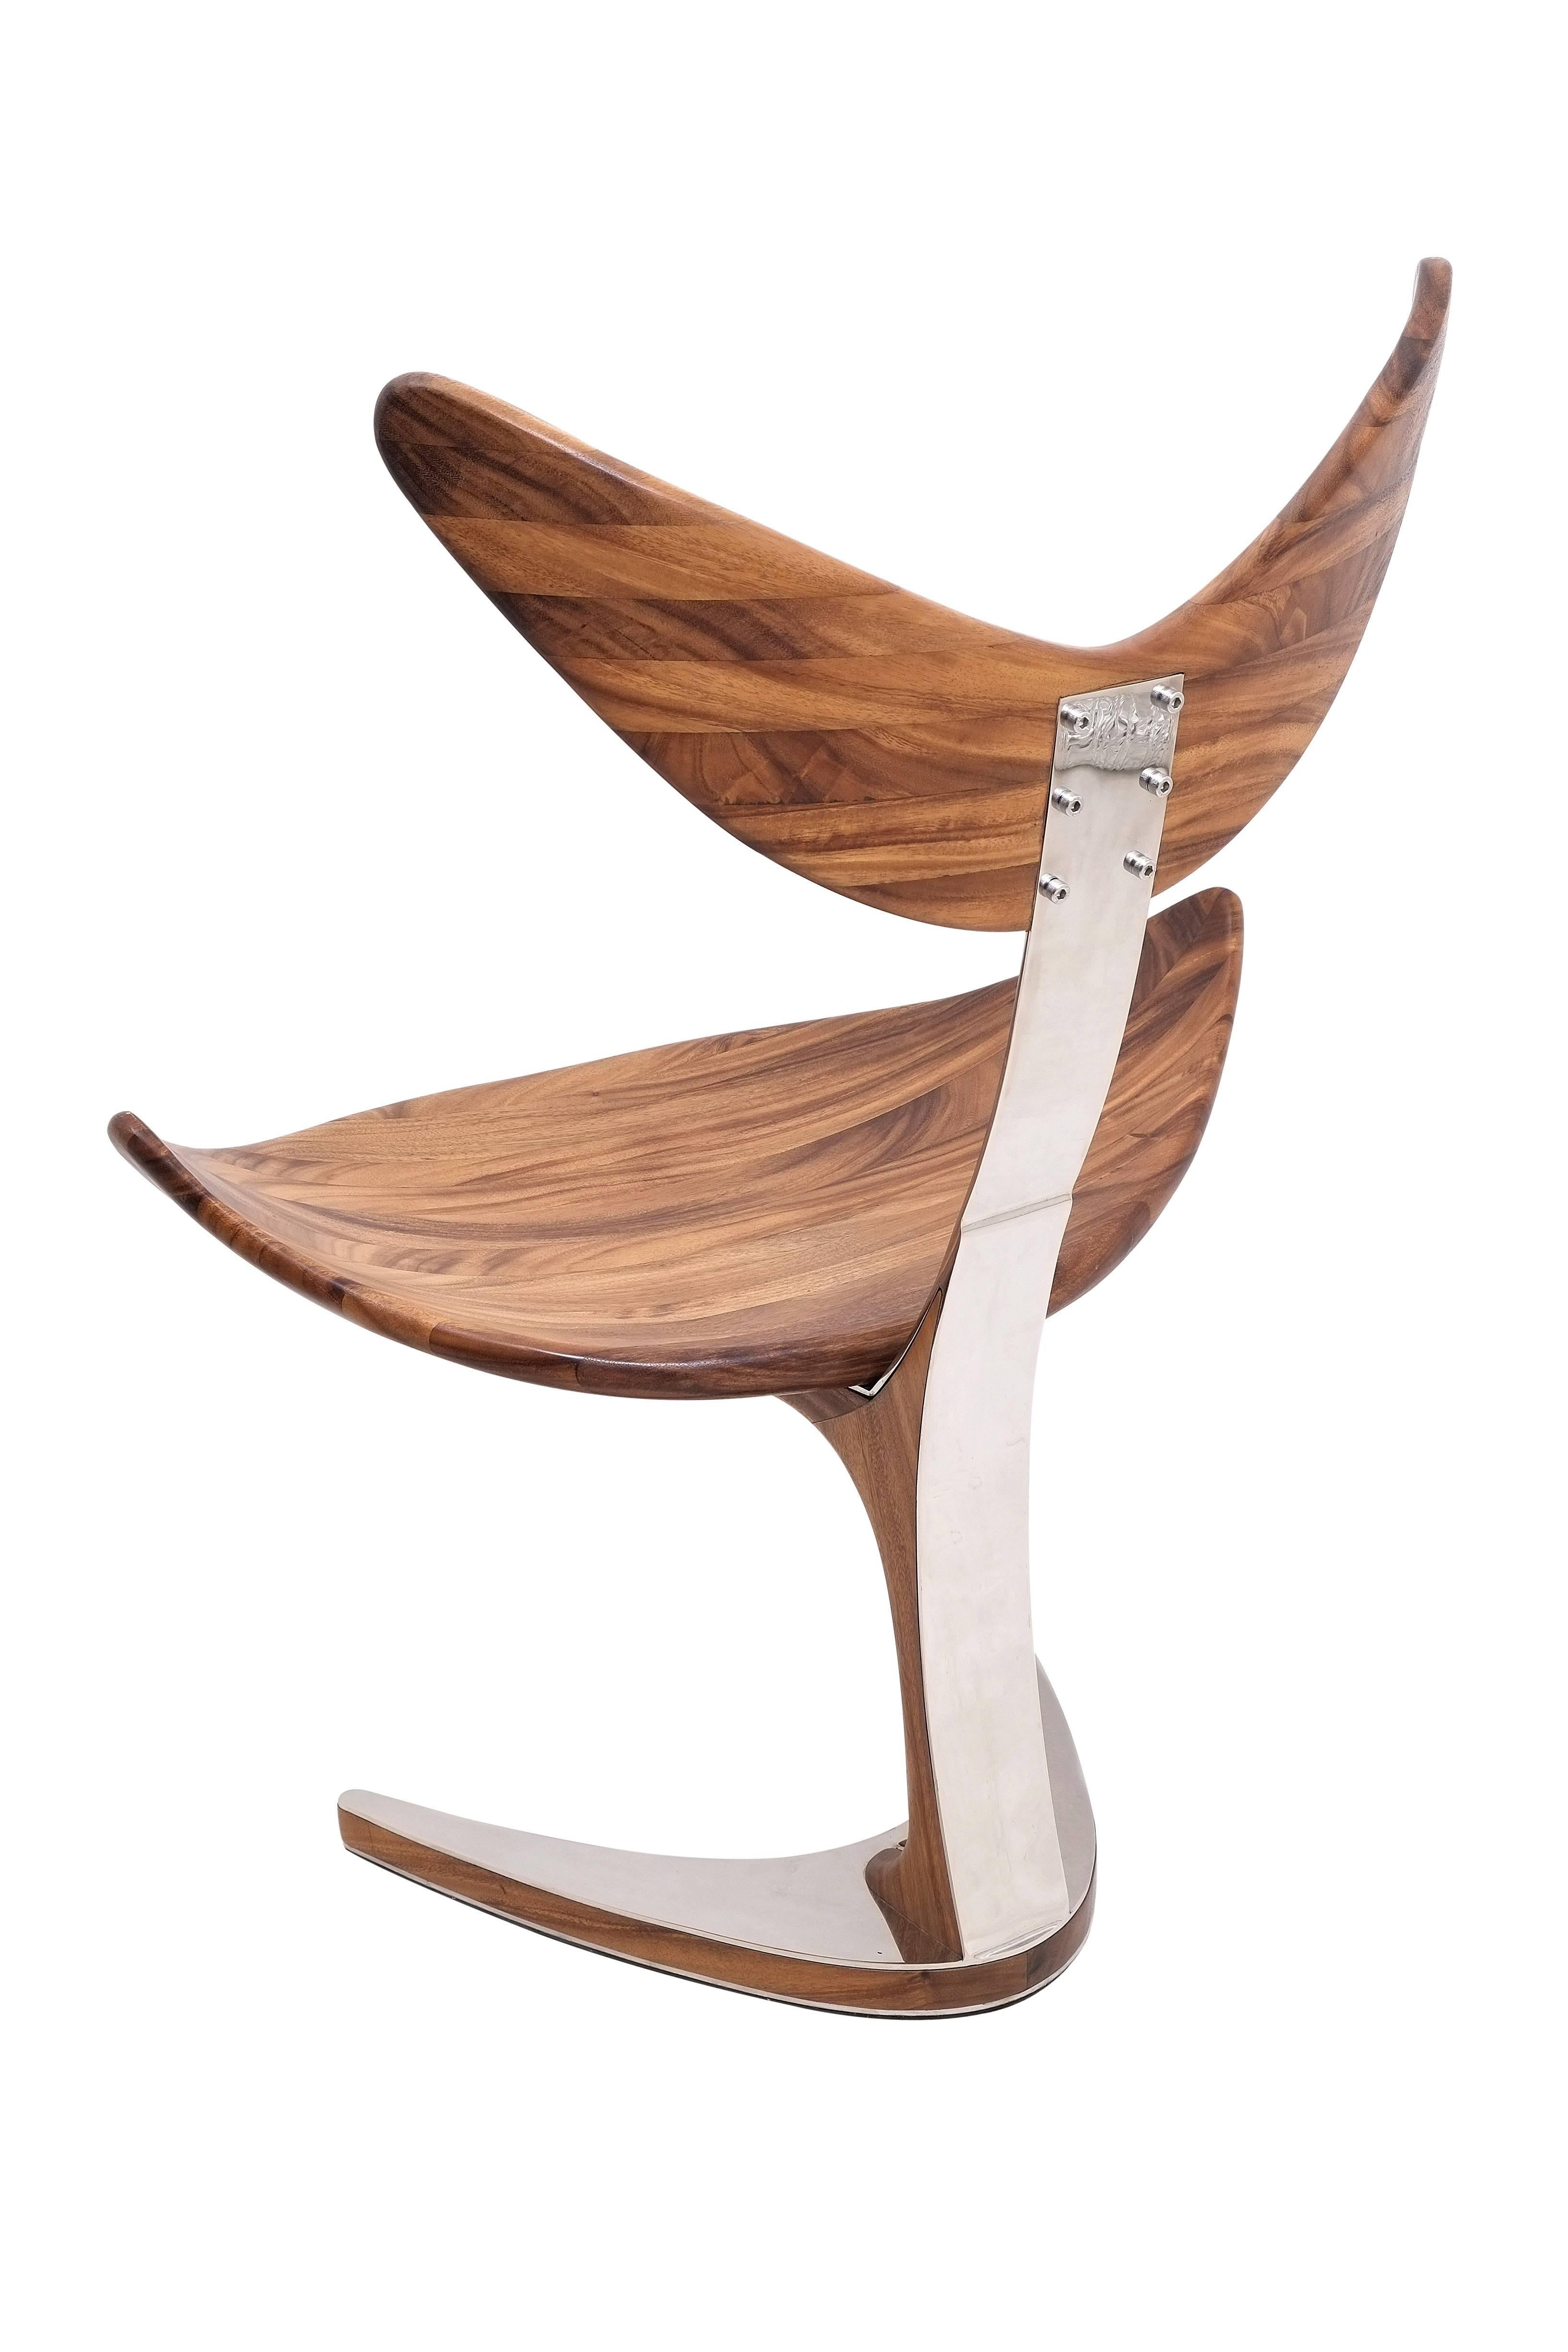 Balinese Whale Chair from Suar Wood with Mirror Polished Stainless Steel, Saturday Sale For Sale